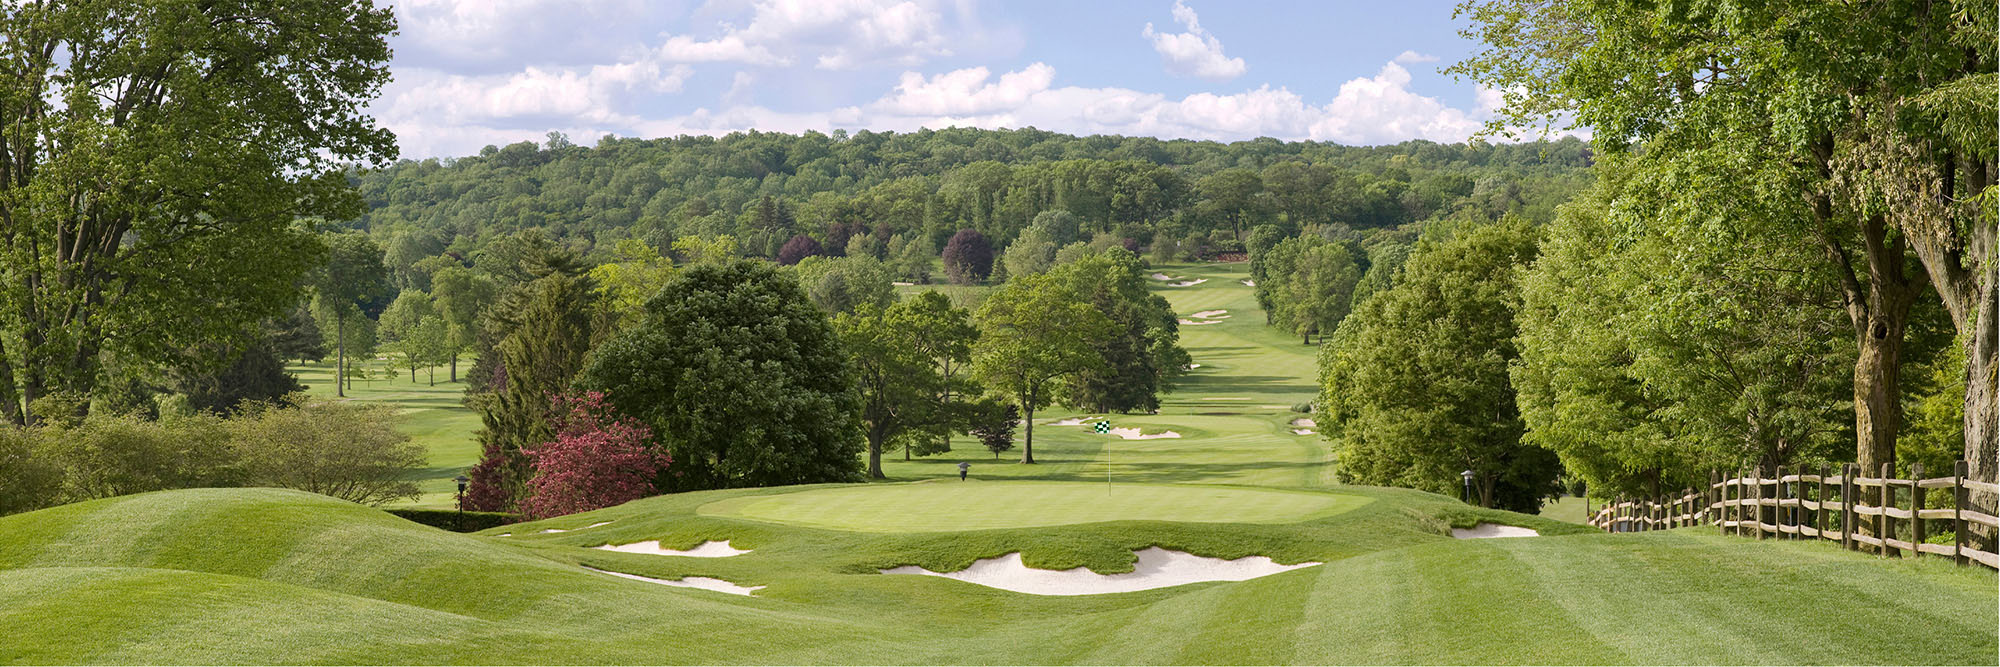 Whitemarsh Valley Country Club No. 9